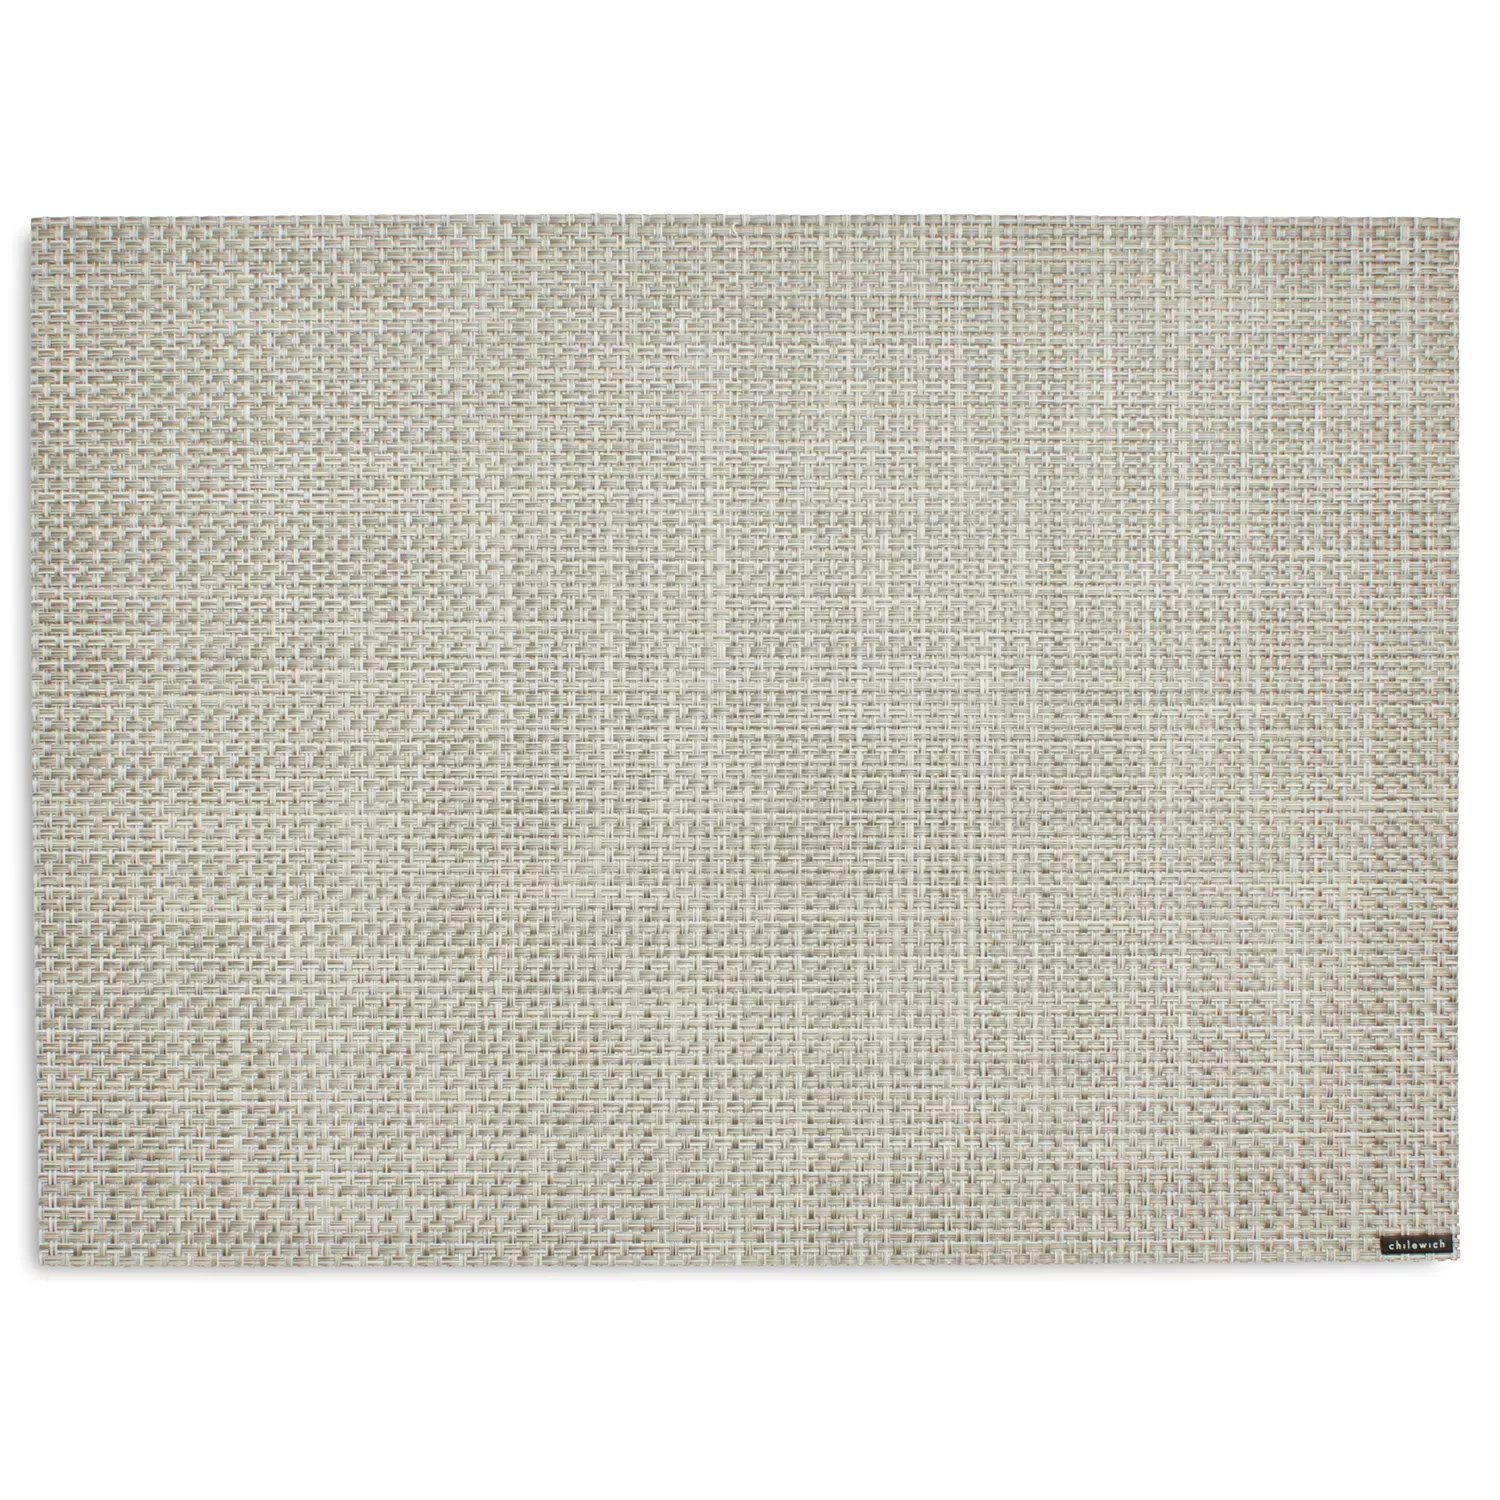 Chilewich Basketweave Placemat, 19&#34; x 14&#34;